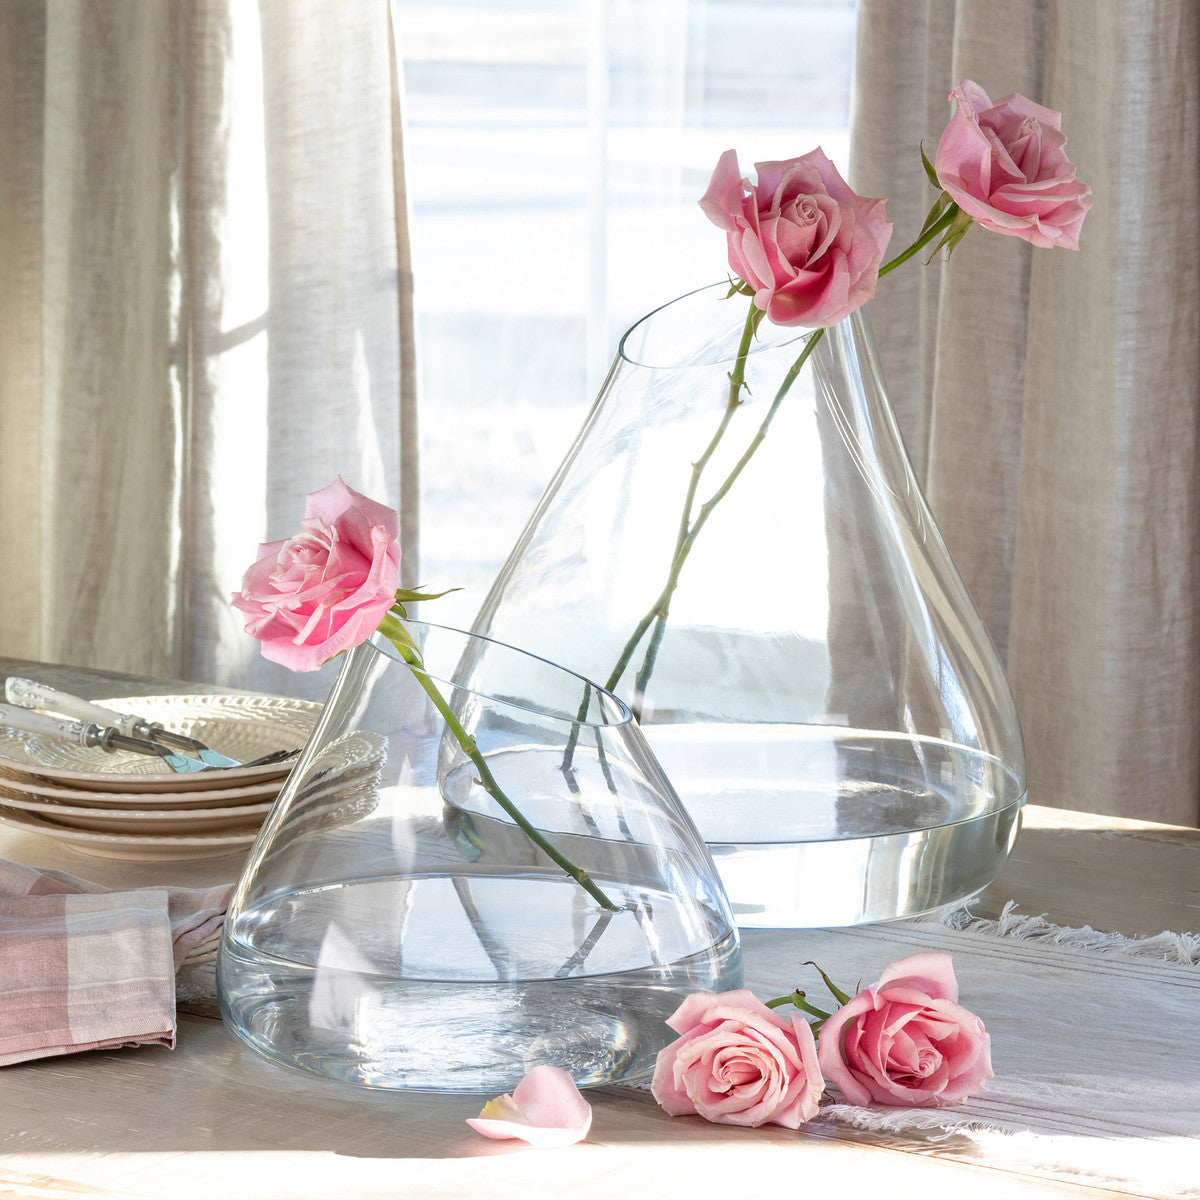 tear-drop-shaped-assymetrical-clear-glass-vases-with-pink-roses-near-a-window